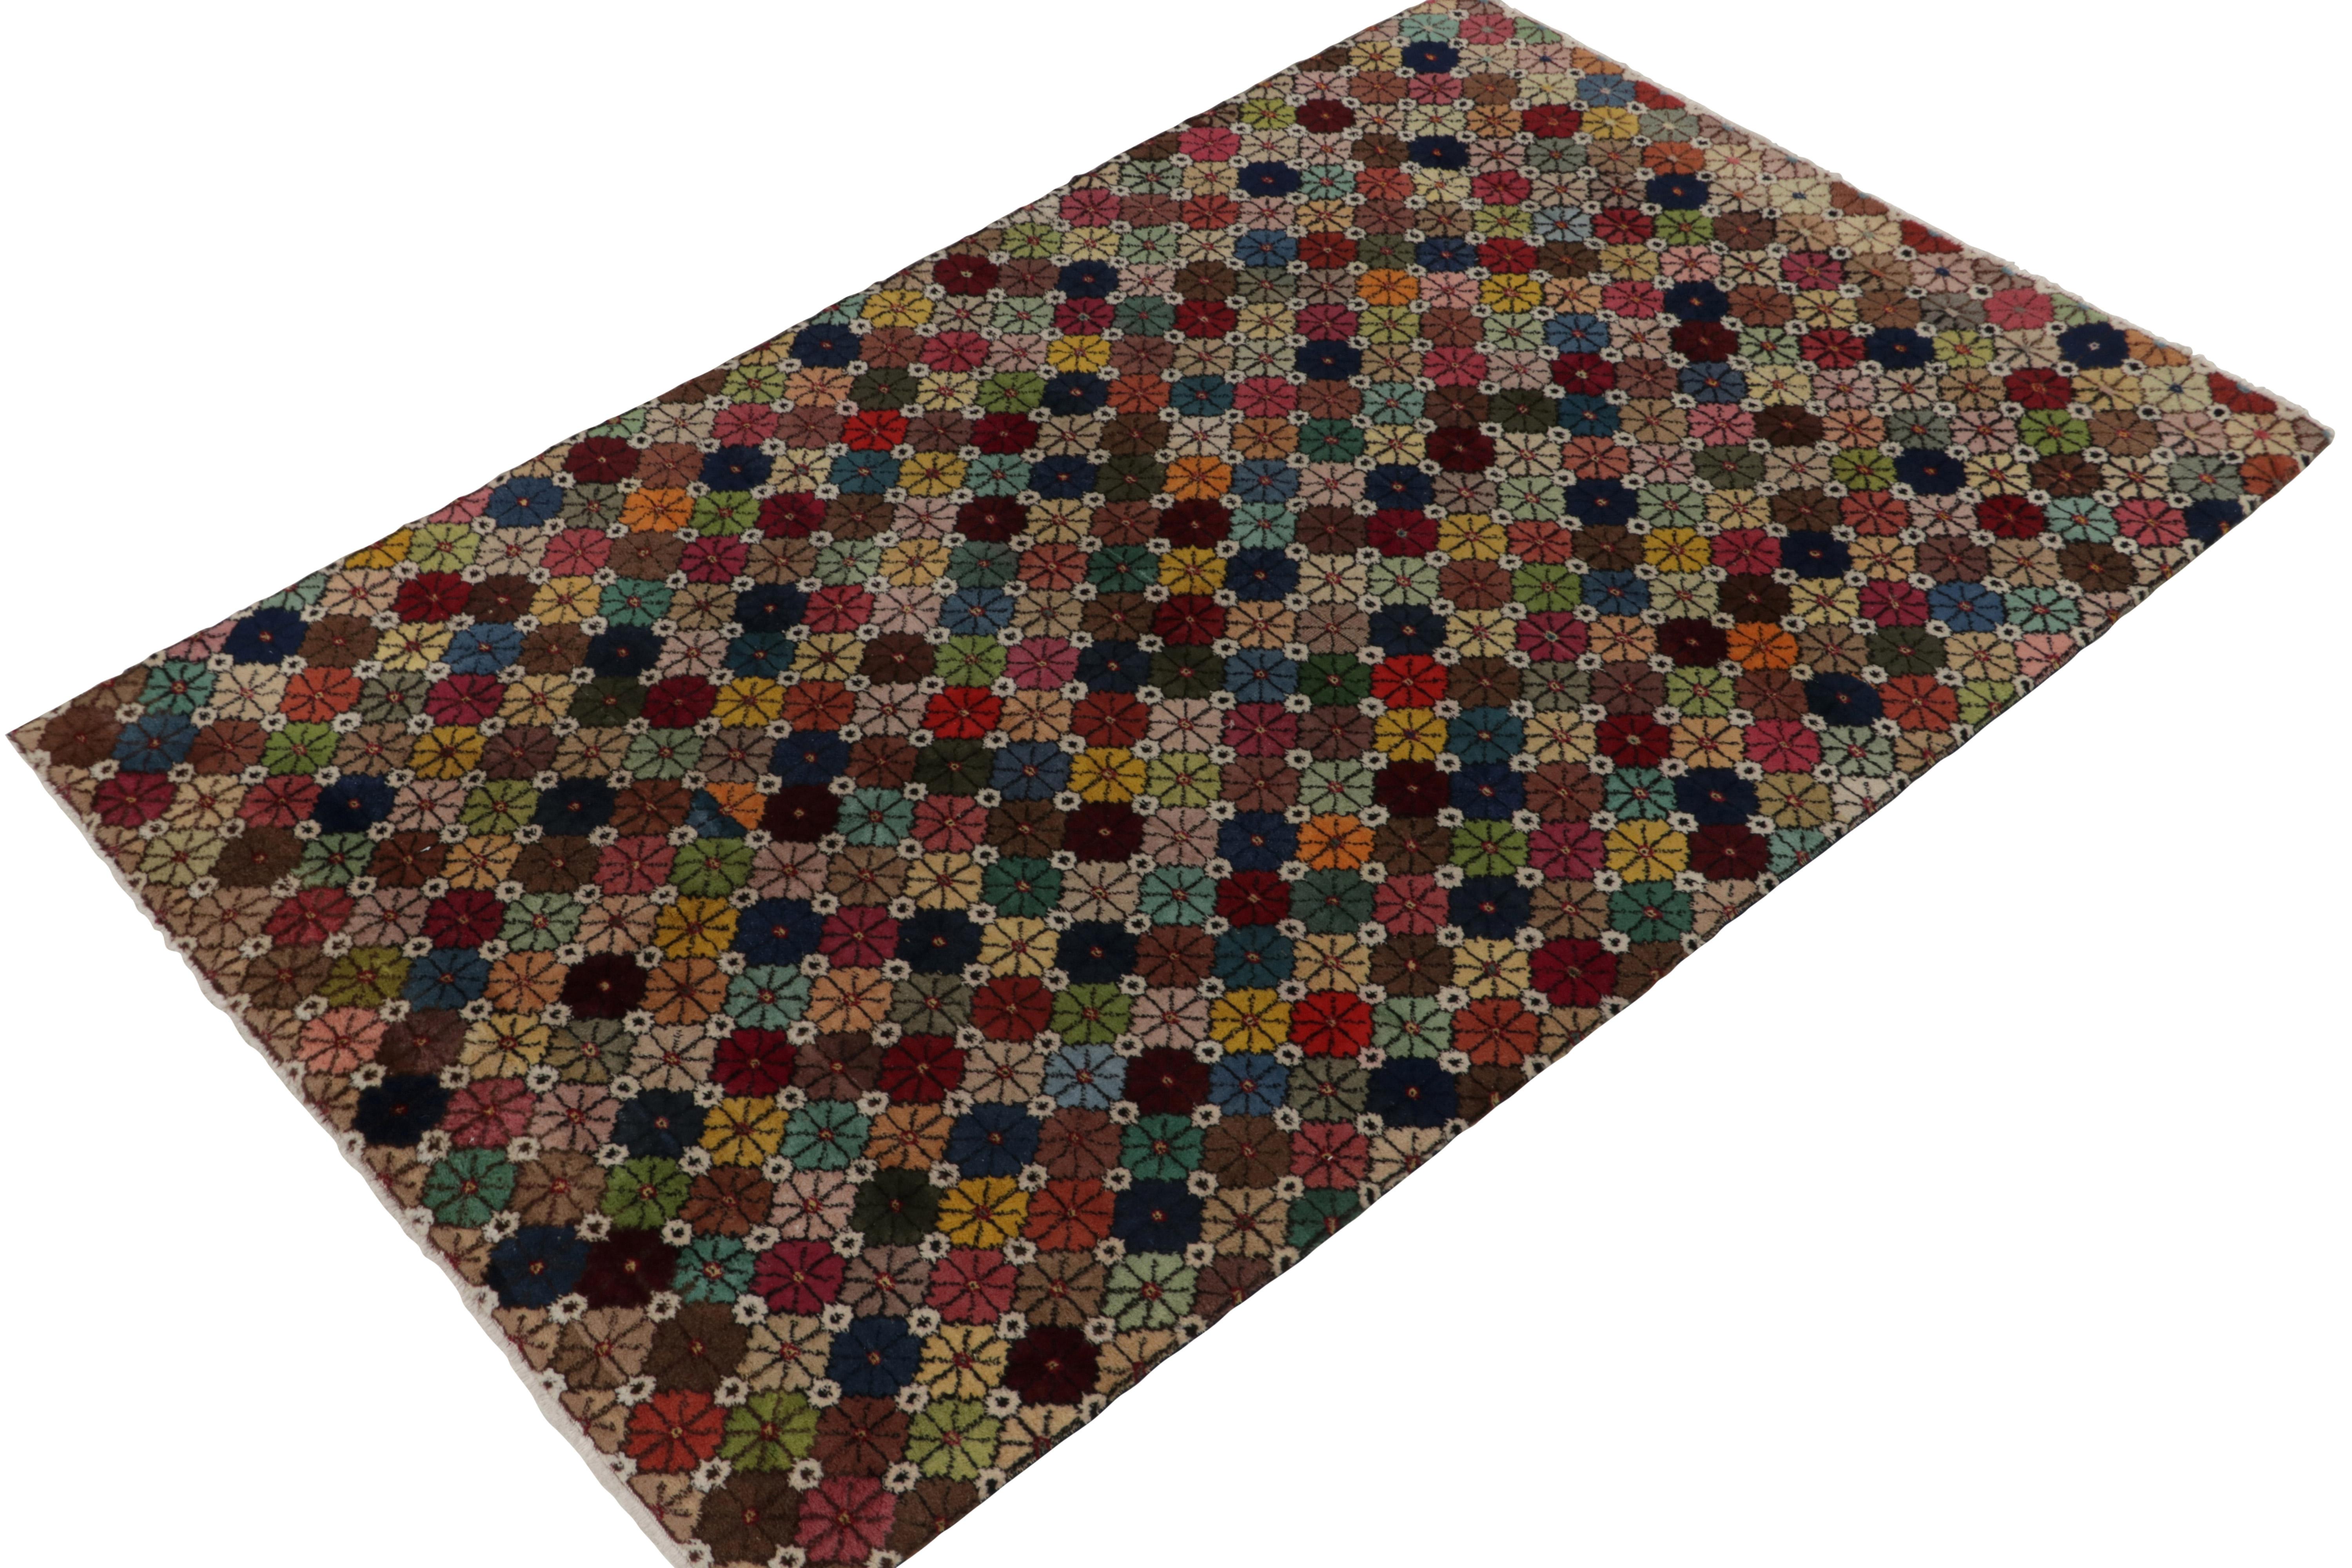 Hand-knotted in wool circa 1960-1970, this vintage 6x9 mid-century rug joins from the mid-century Pasha Collection by Rug & Kilim. This curation celebrates the rare works believed to hail from multi-disciplinary Turkish icon, Zeki Müren. 

On the